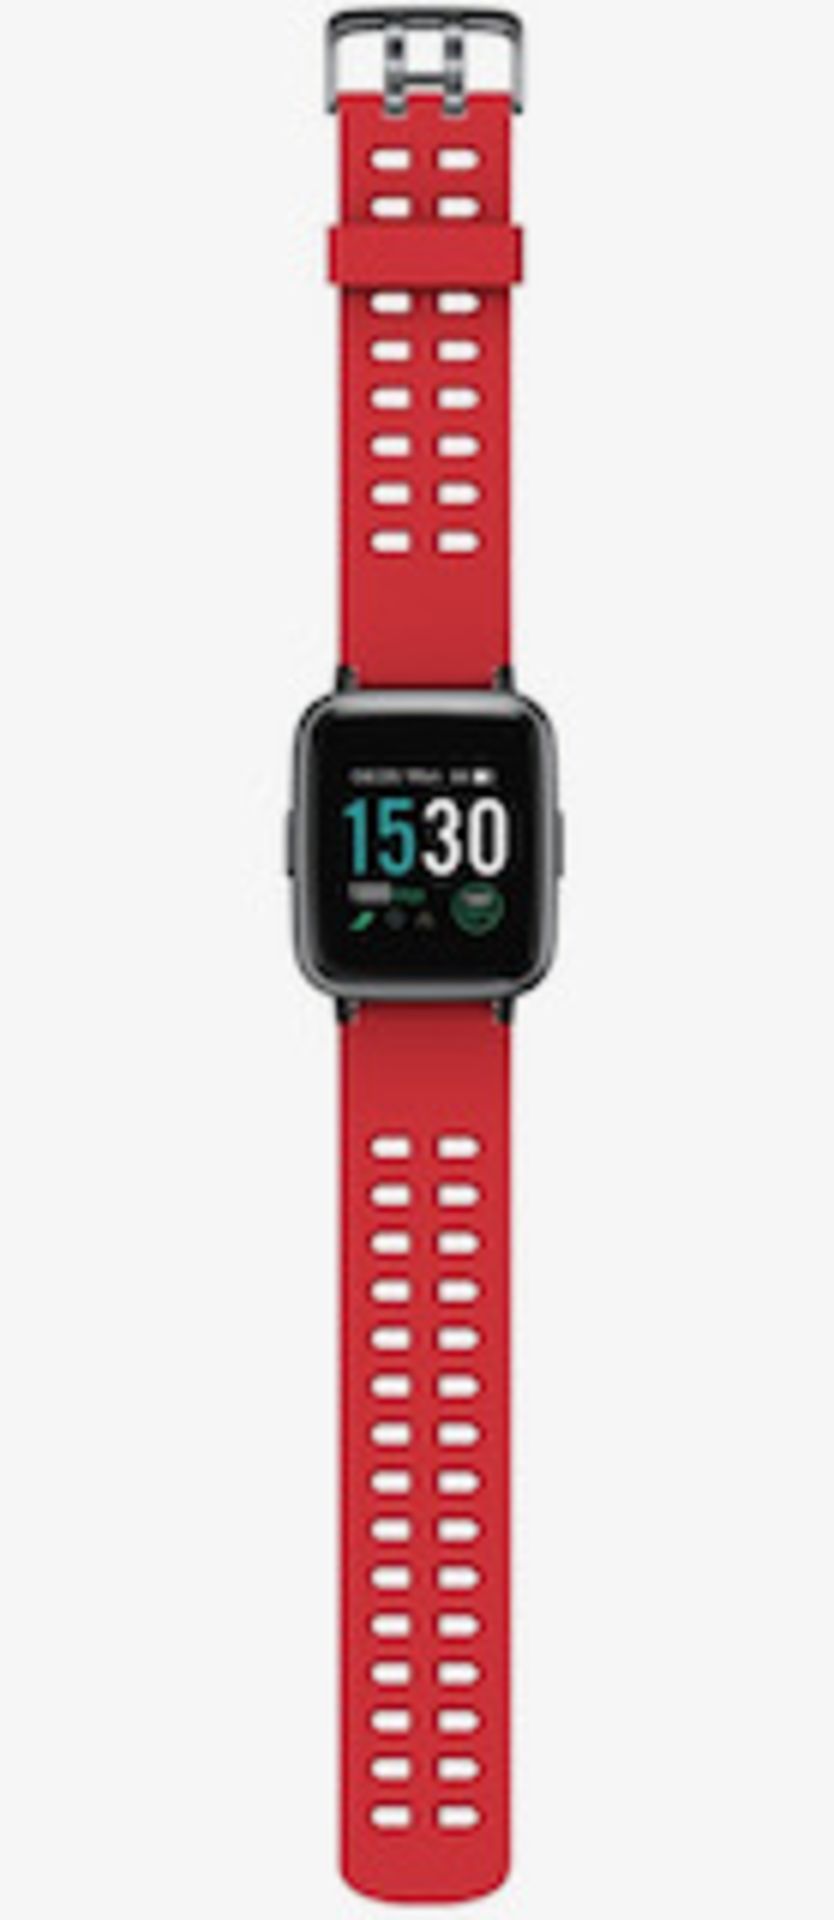 Brand New Unisex Fitness Tracker Watch Id205 Red Strap About This Item 1.3-Inch LCD Colour - Image 10 of 34